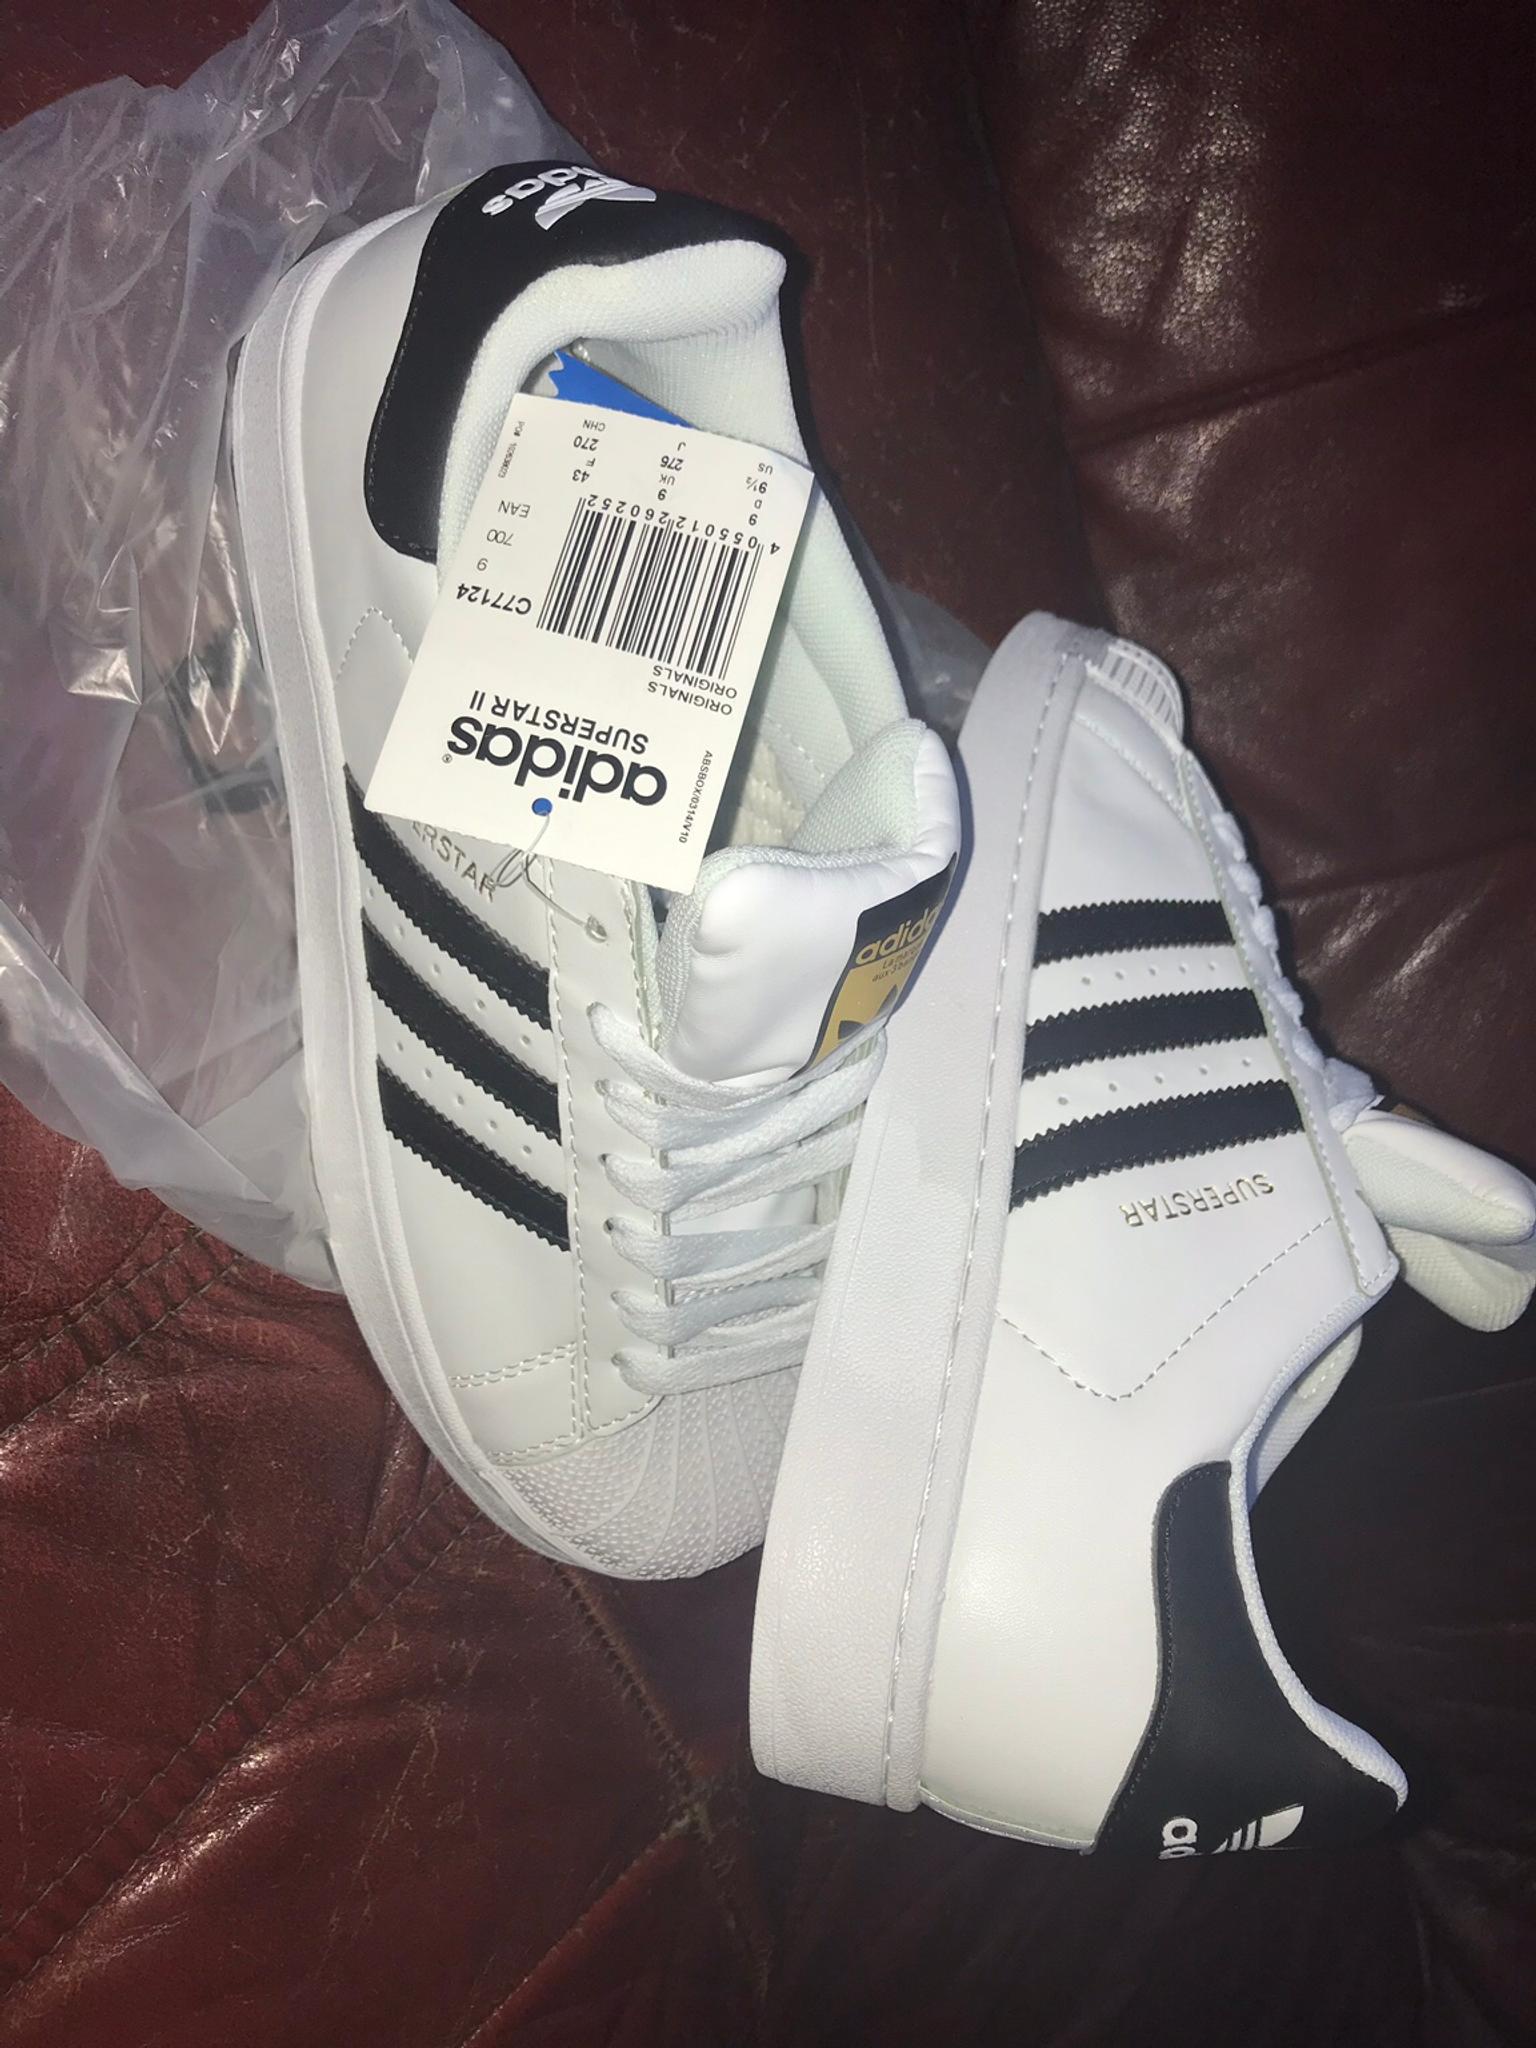 adidas superstar trainers size 9